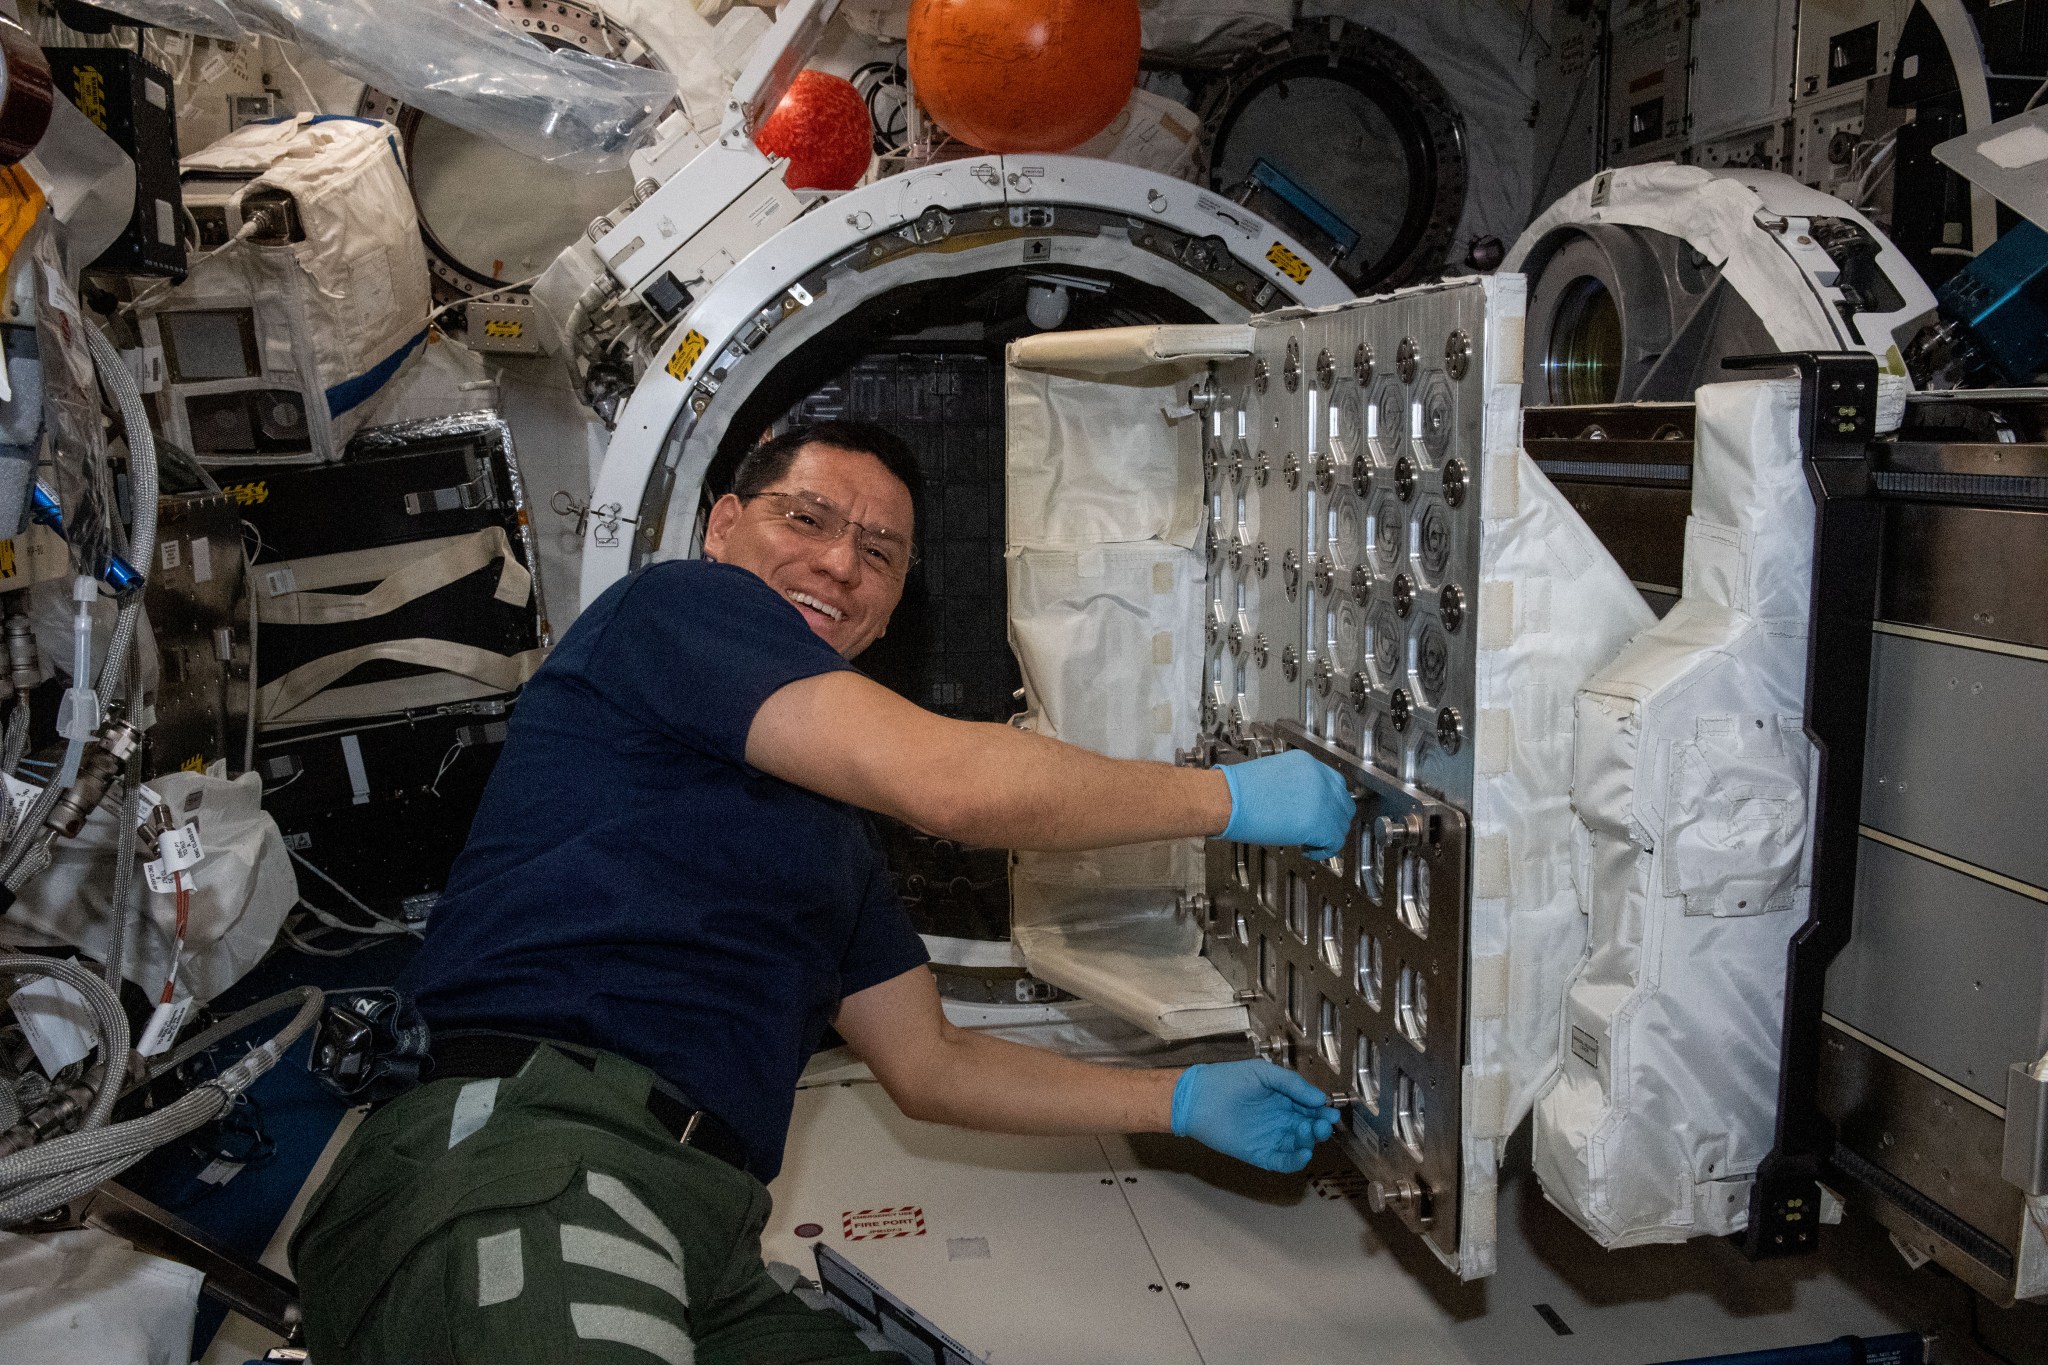 NASA astronaut and Expedition 69 Flight Engineer Frank Rubio works to install the NanoRacks CubeSat Deployer inside the Kibo laboratory module's airlock. After the airlock is depressurized, the Japanese robotic arm grapples the deployer and places it outside in the vacuum of microgravity pointing it away from the International Space Station. CubeSats from private, governmental, and academic organizations are then deployed into Earth orbit for a variety of research objectives.